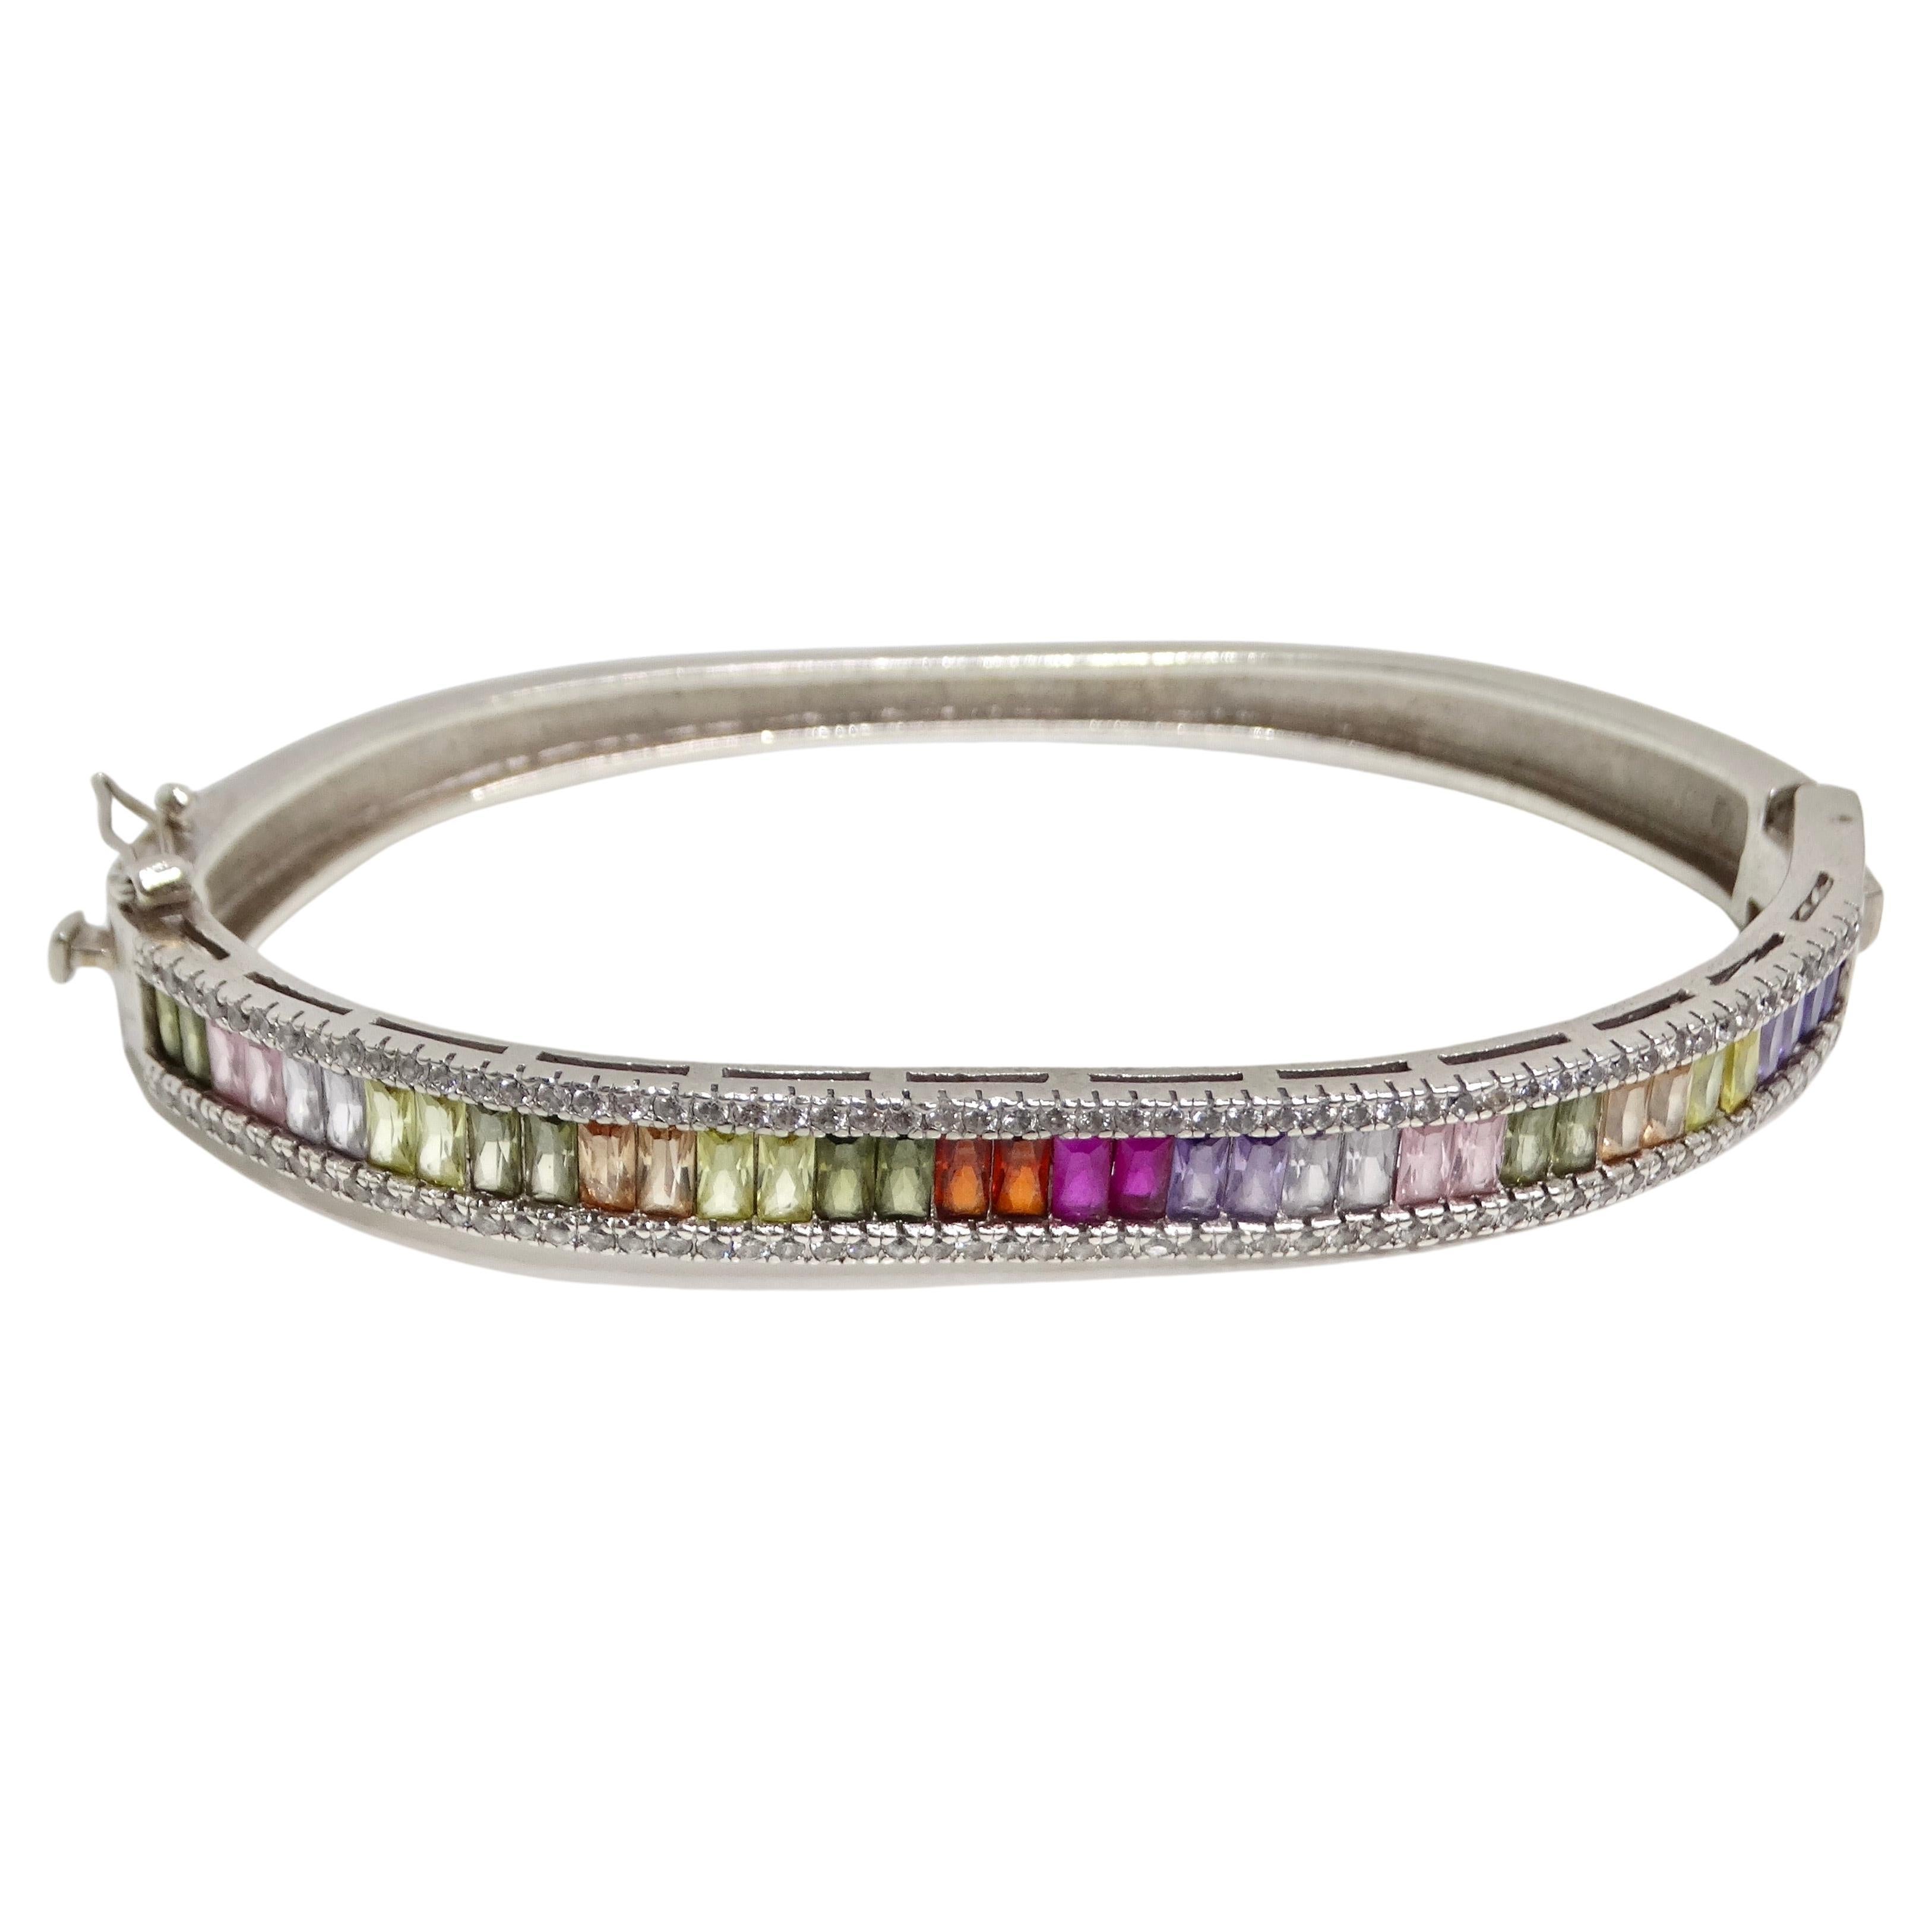 1990s with the Vintage Multicolor Rhinestone Silver Bracelet For Sale